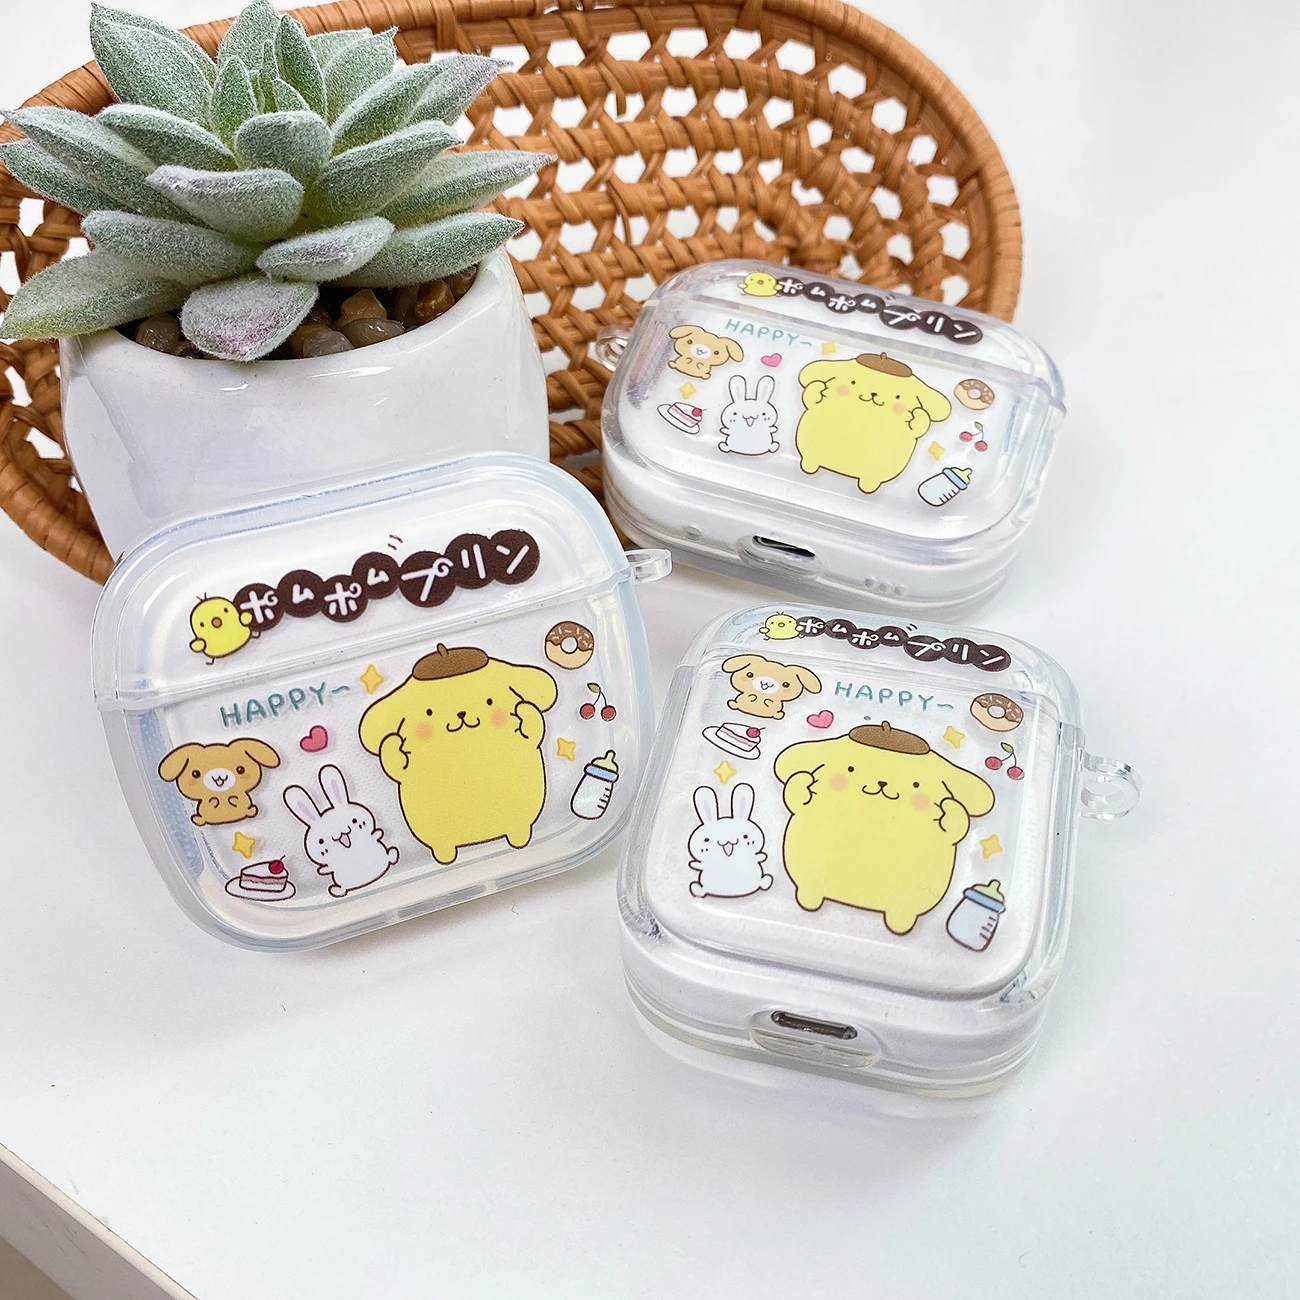 

Sanrio Pom Pom Purin Airpods Headphone Case Cartoon Cool Anti-drop Soft TPU Material, Suitable For Airpods 1, 2, 3, Pro, Pro2